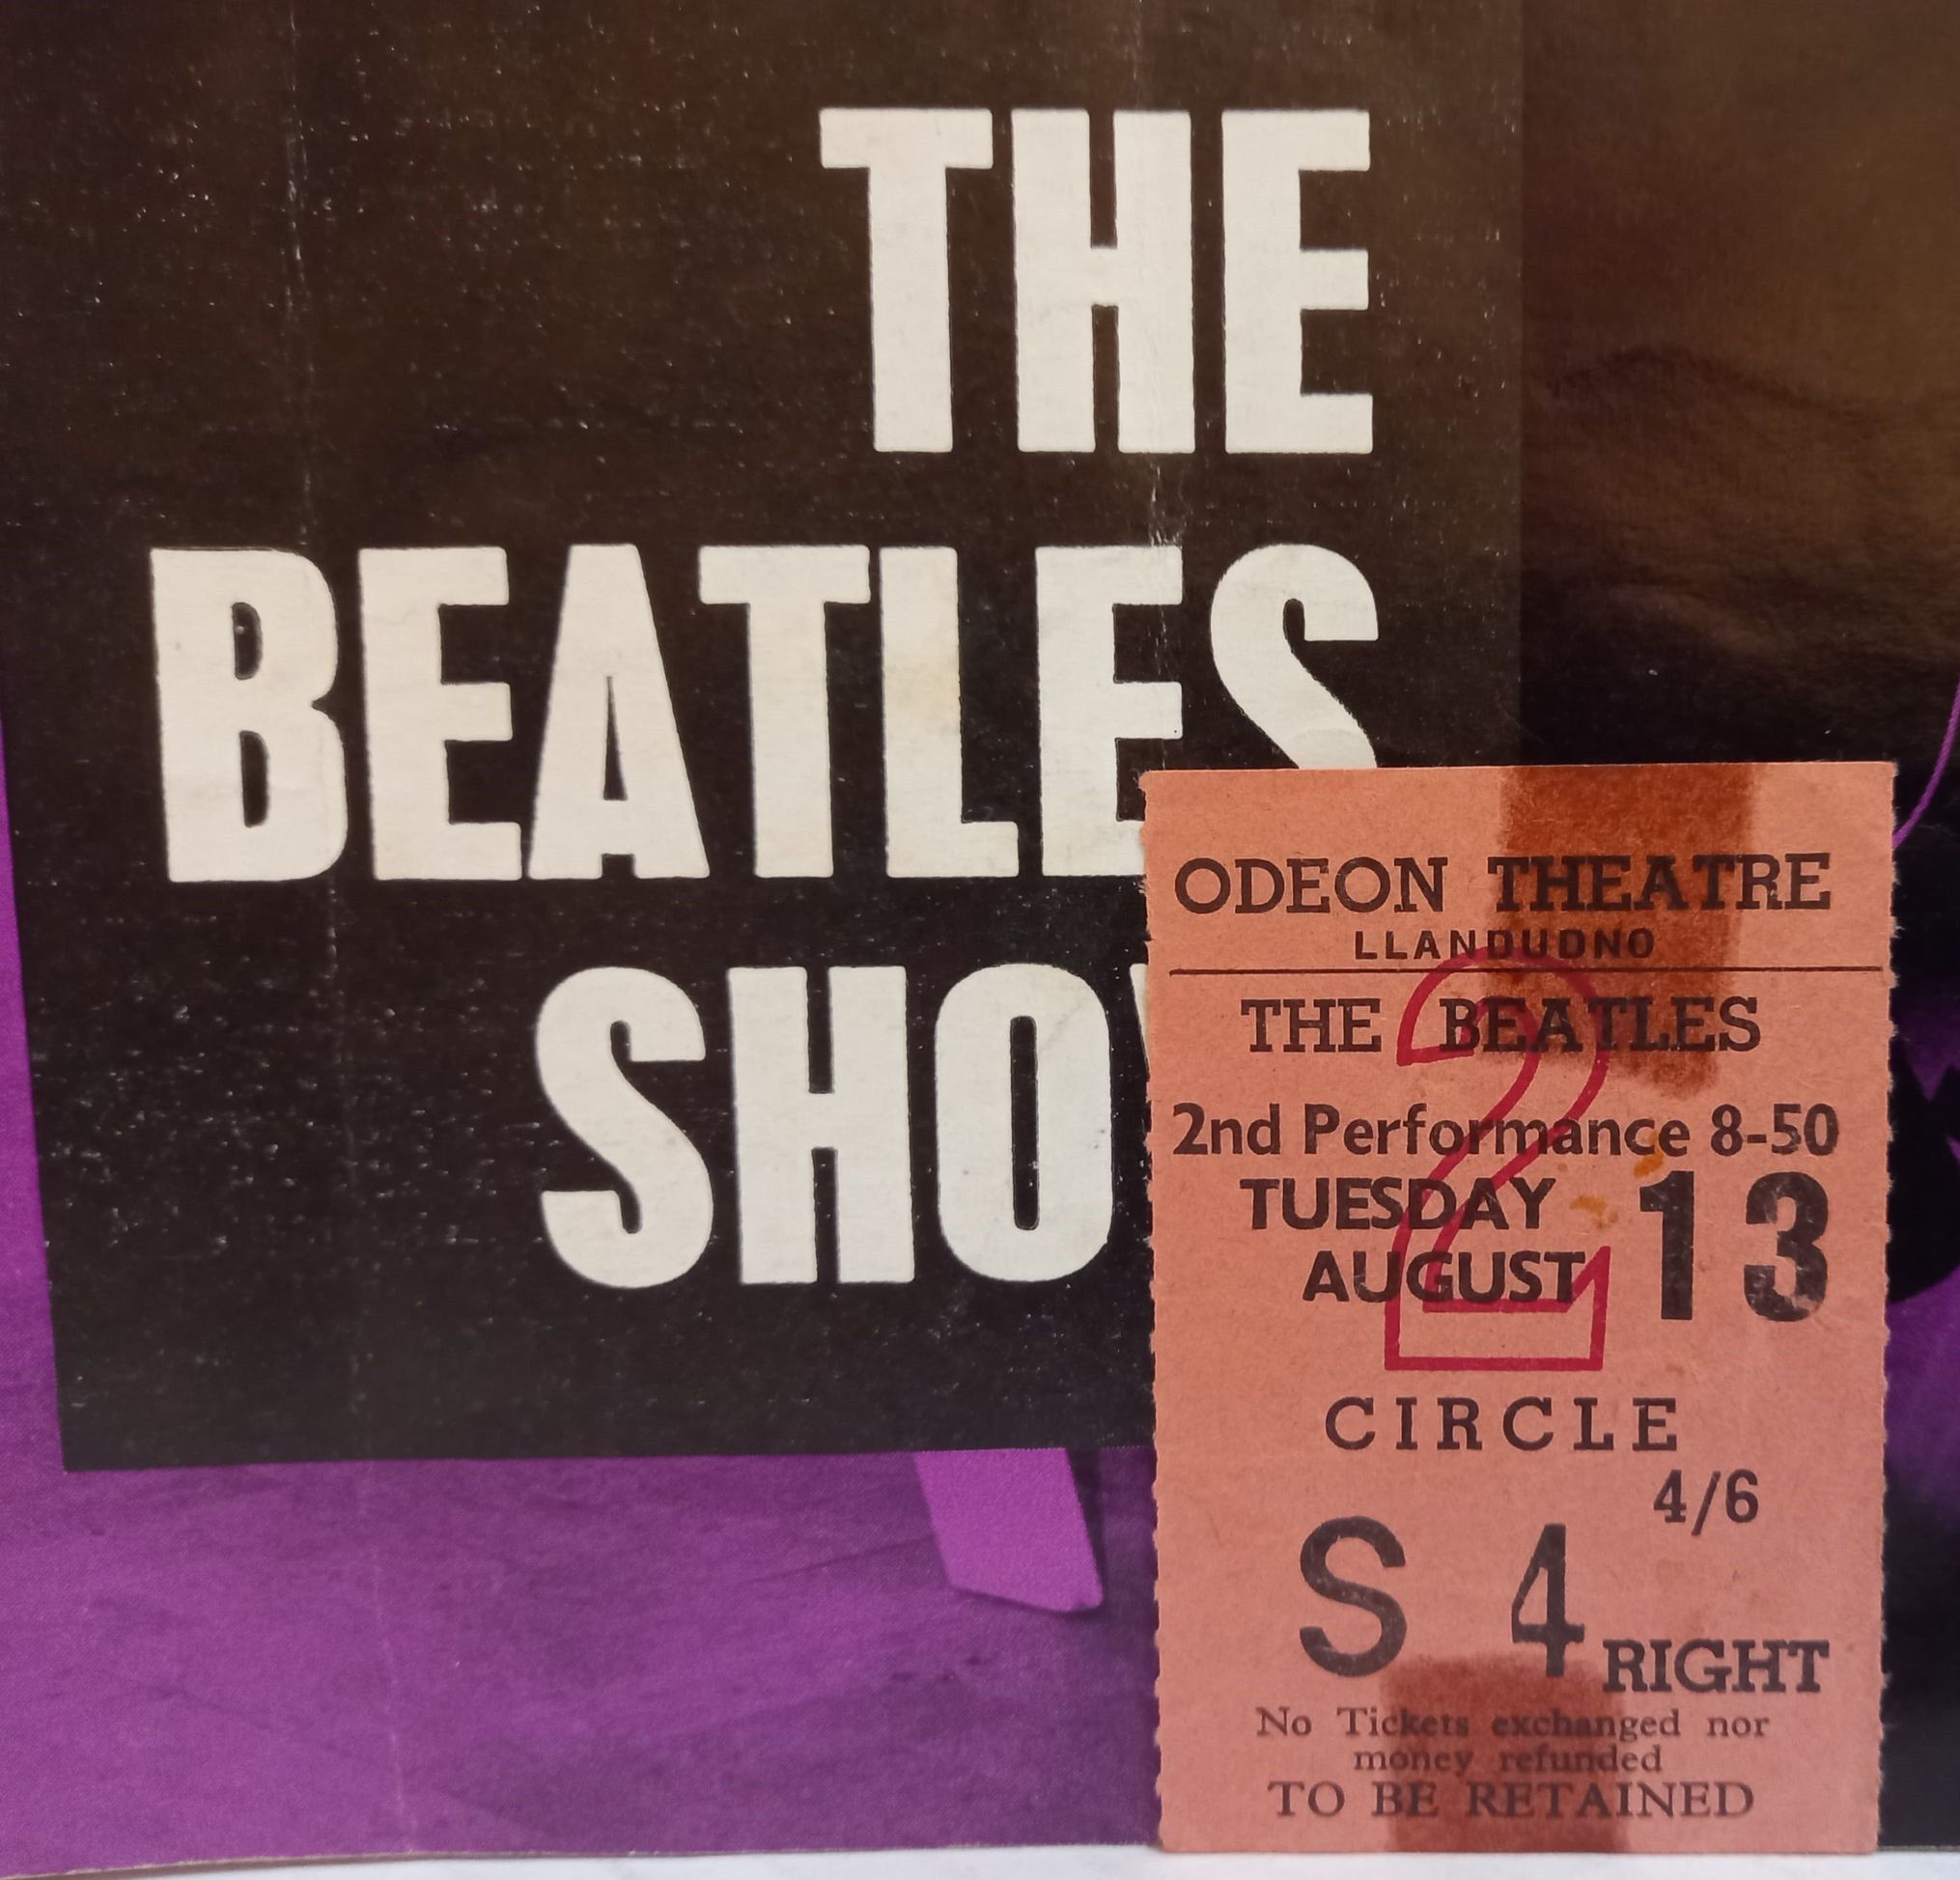 The Beatles Show Programme for Llandudno Odeon Theatre with ticket stub dated 13th August 1963 (2) - Image 2 of 3